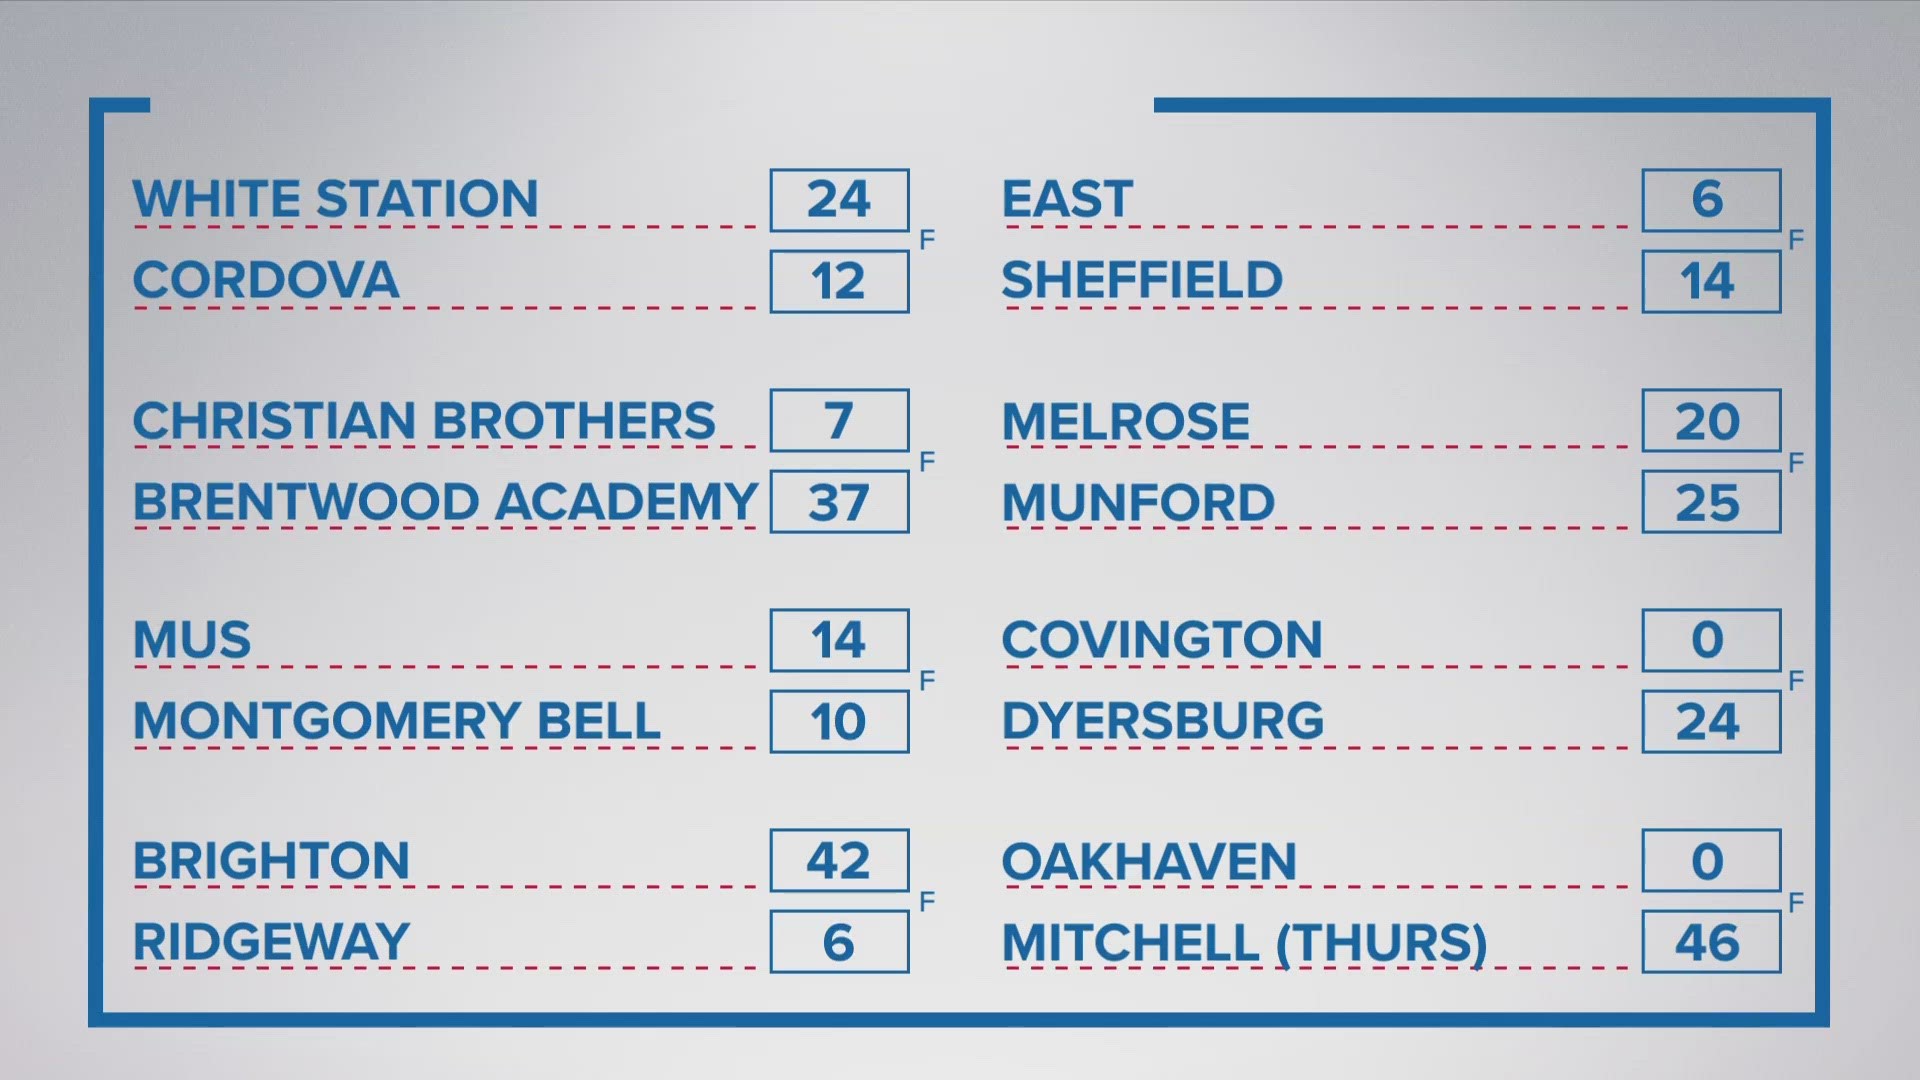 Avery Braxton shares the final scores for week 3 of Tennessee high school football.